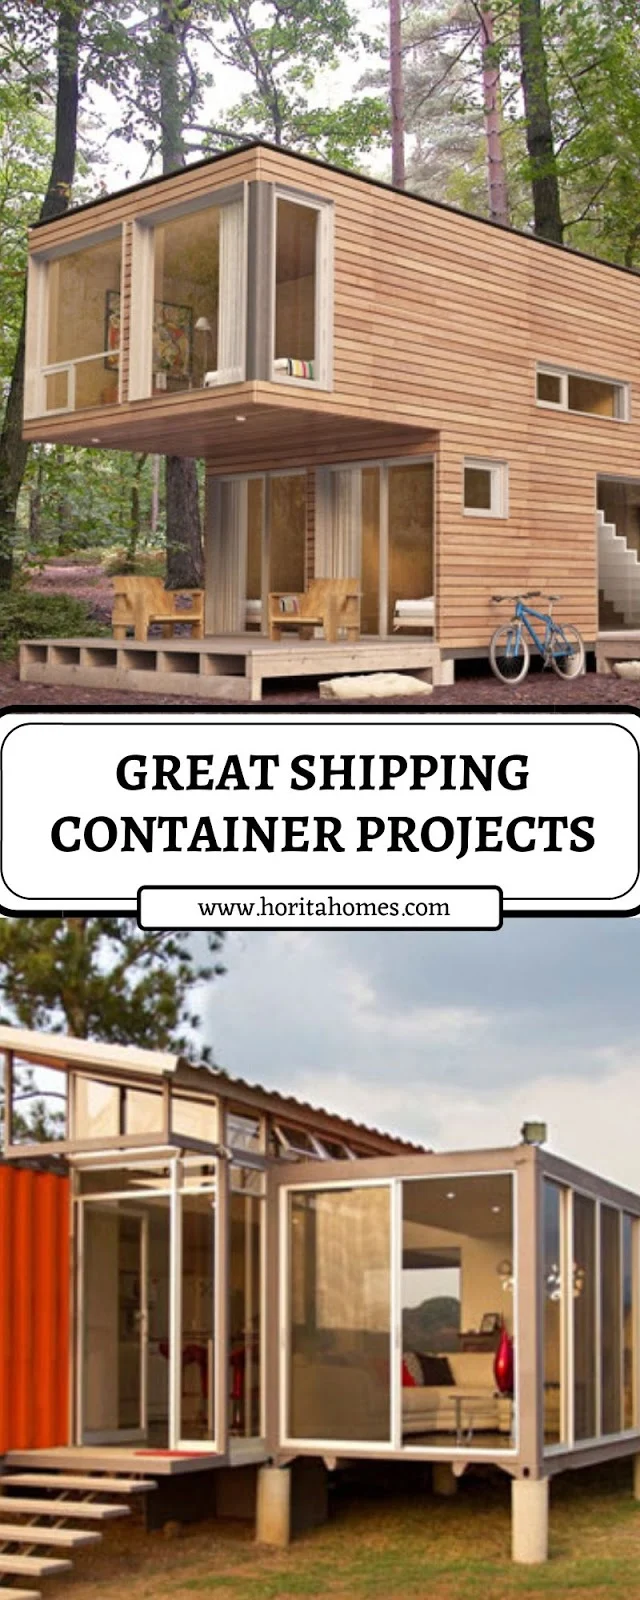 GREAT SHIPPING CONTAINER PROJECTS